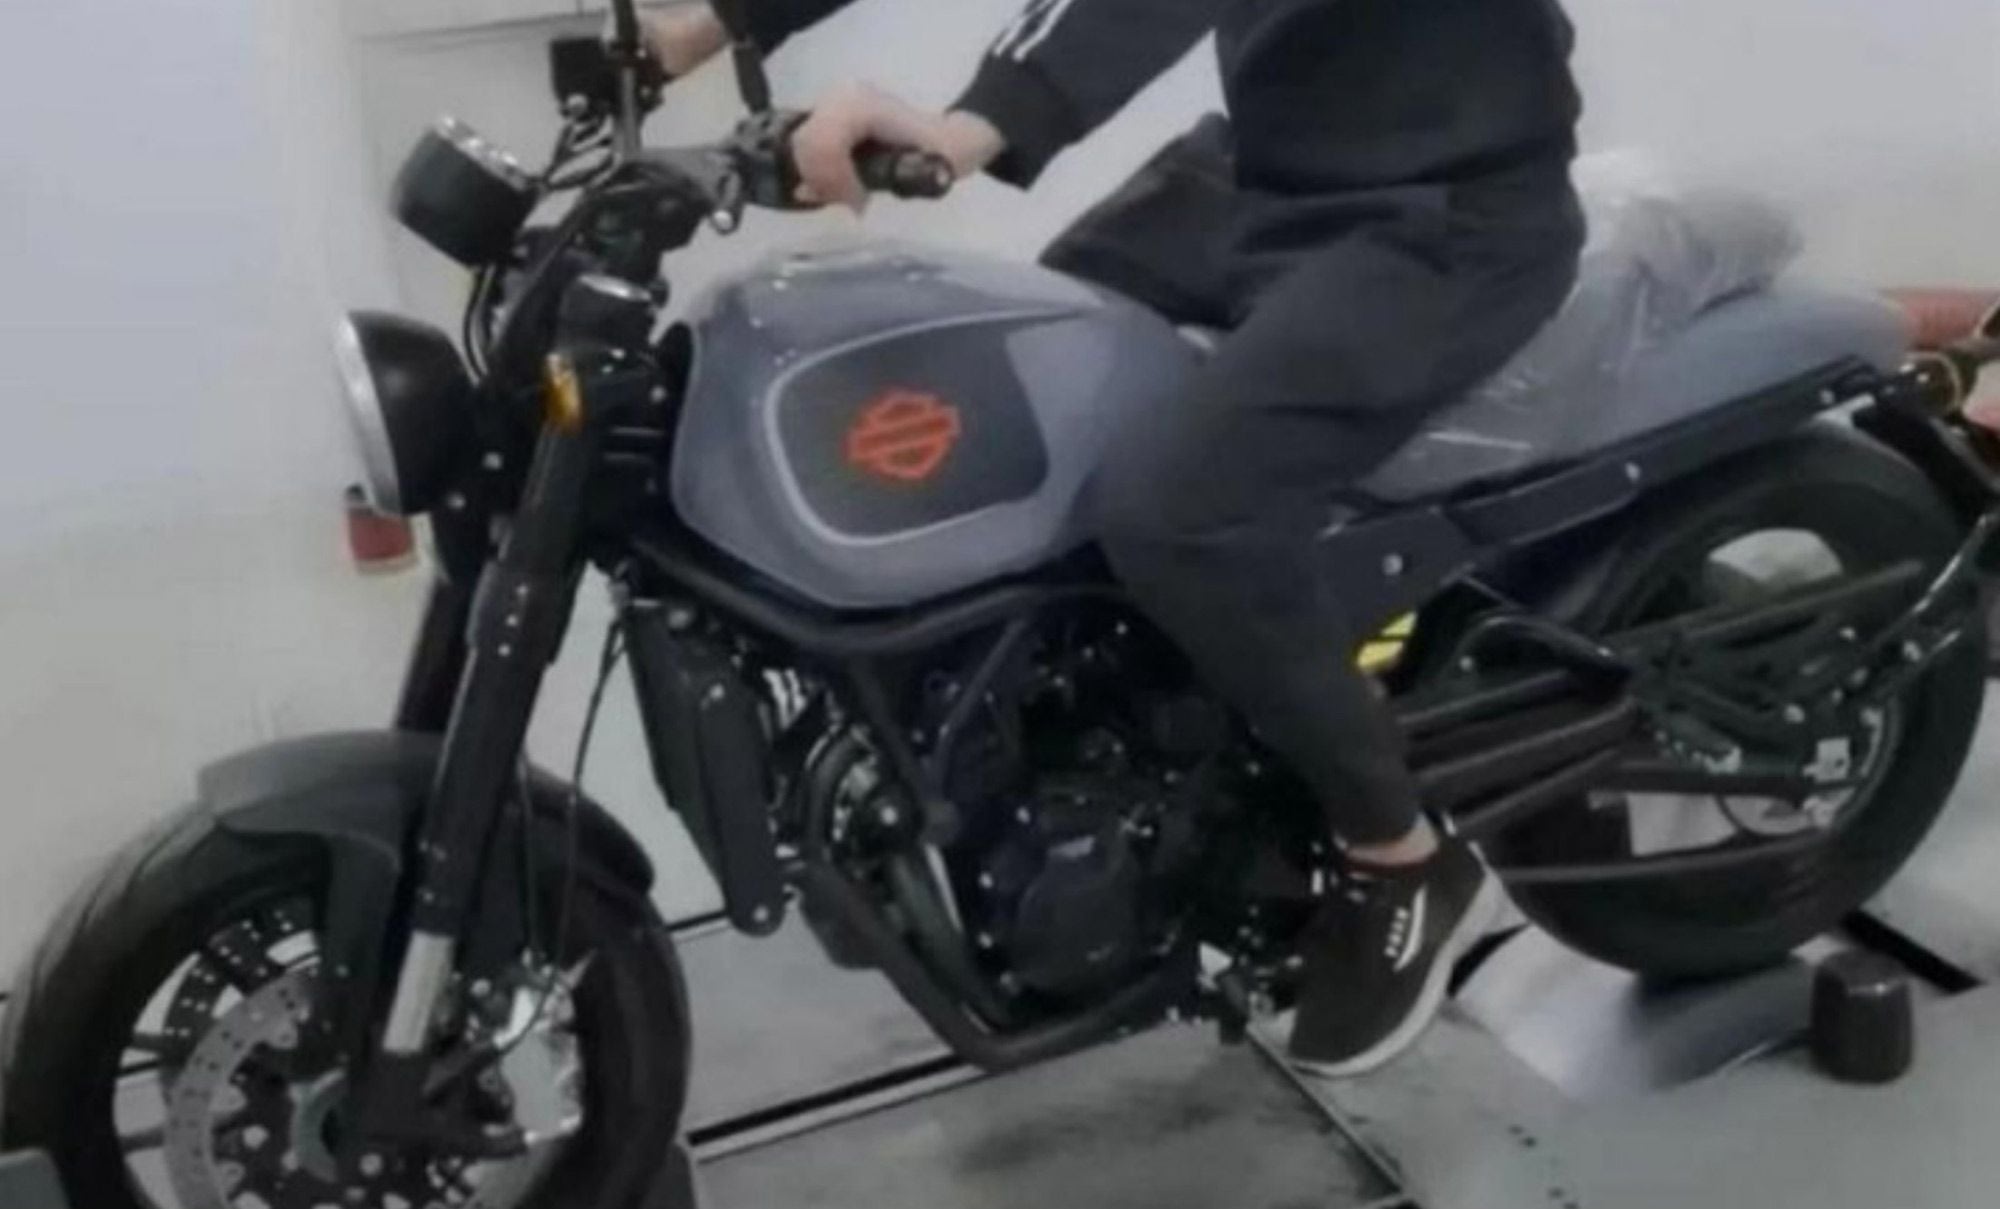 Will we see a new 500cc Harley-Davidson model from Qianjiang before the long-rumored 350cc version appears? This spy shot says so.